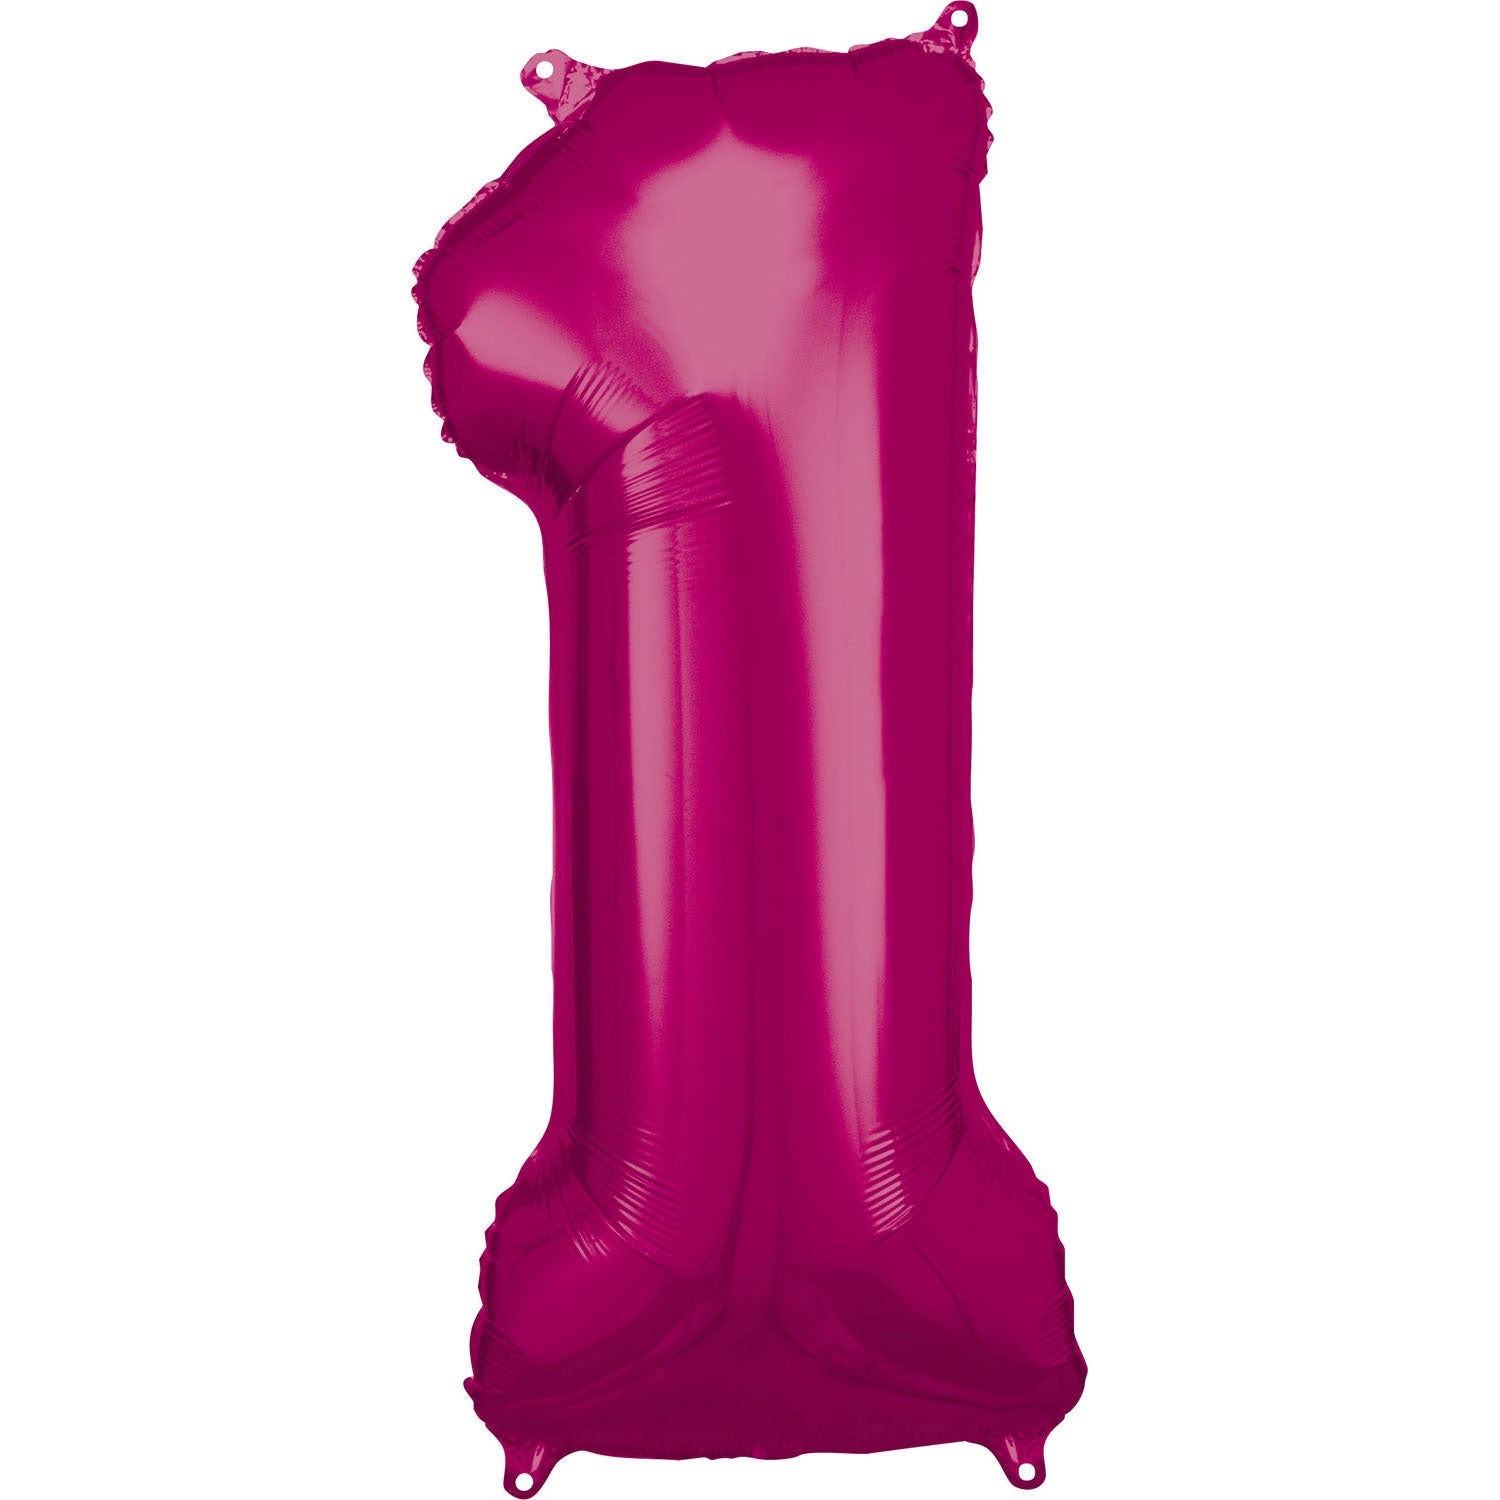 Pink Supershape Number 1 Foil Balloon 86cm (33in) height by 33cm (13in) width Balloon is sold uninflated. Can be inflated with air or helium.